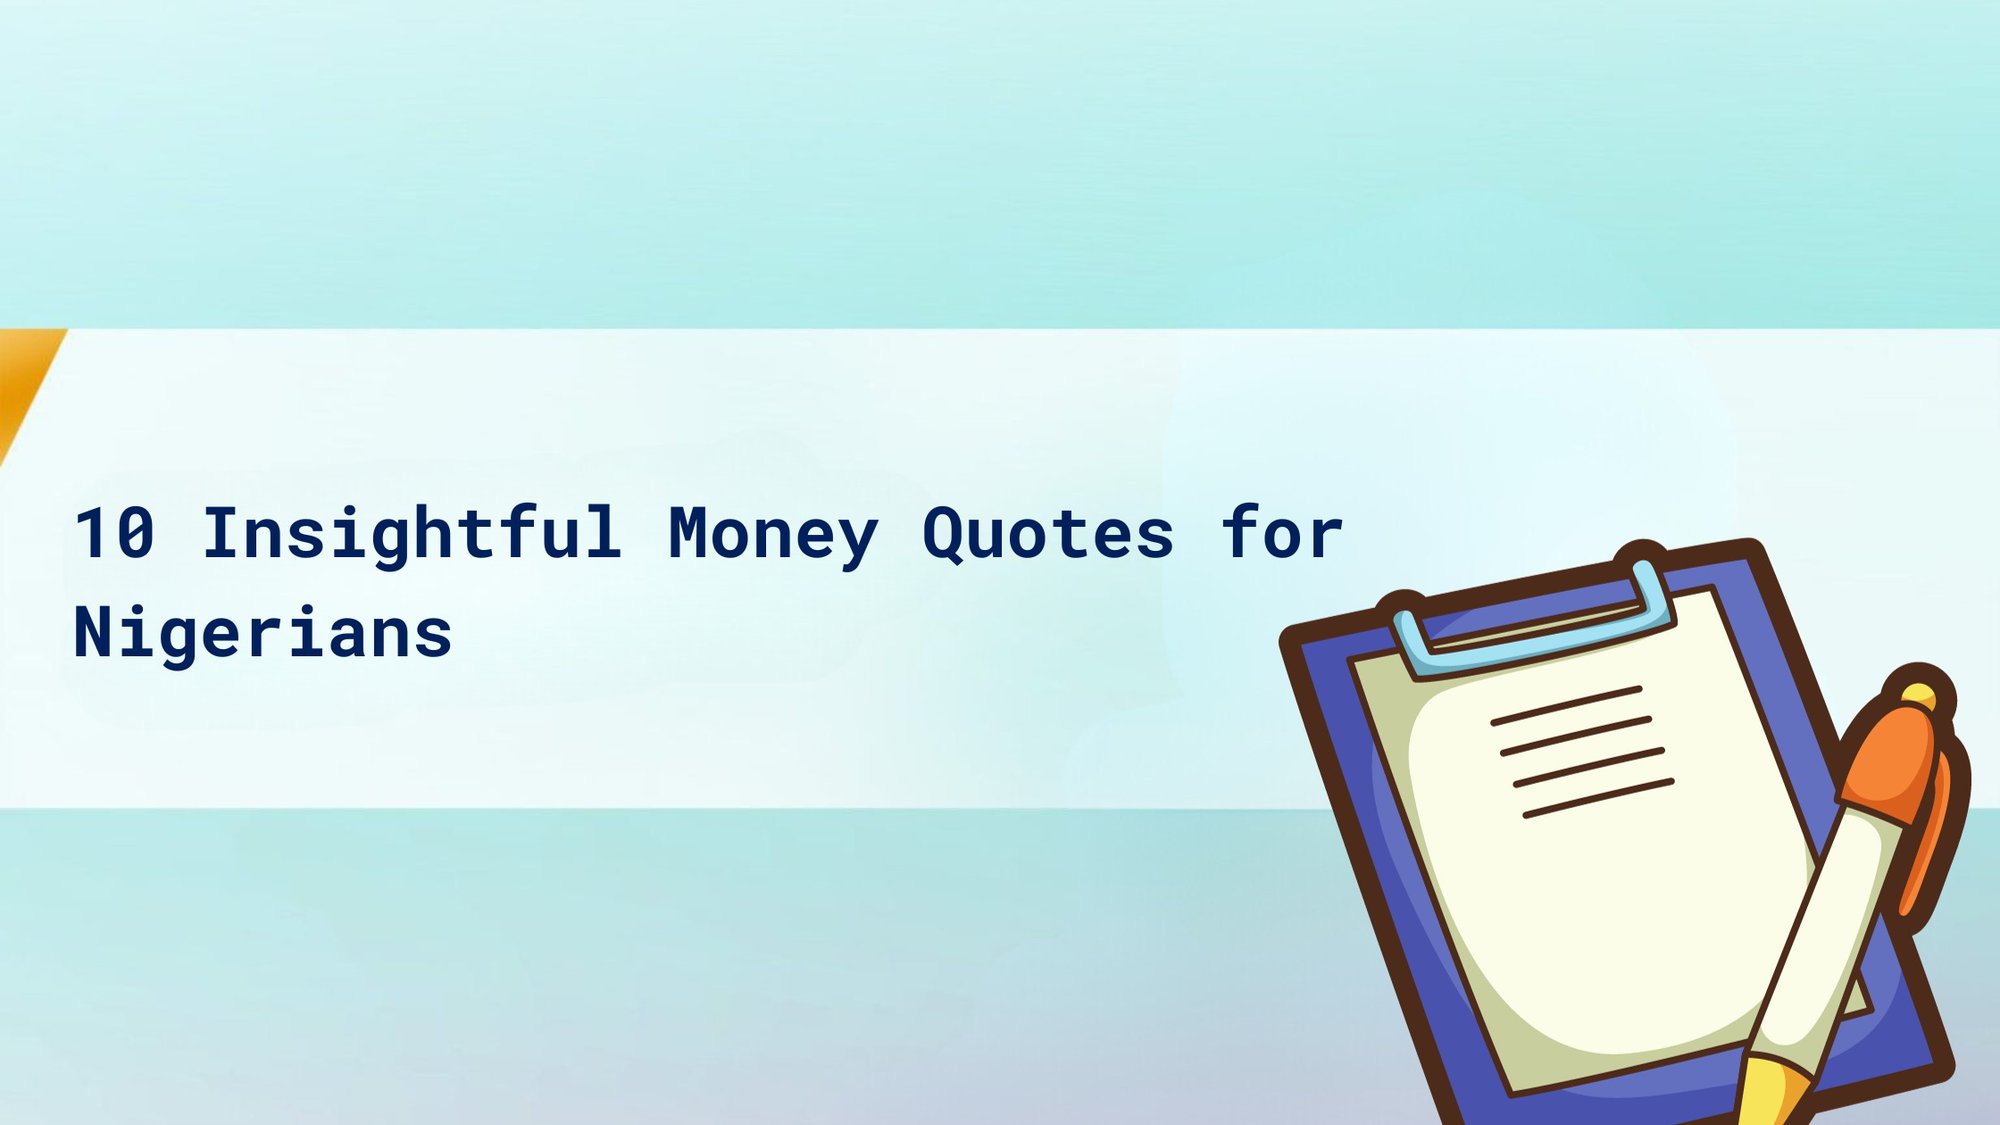 10 Insightful Money Quotes for Nigerians cover